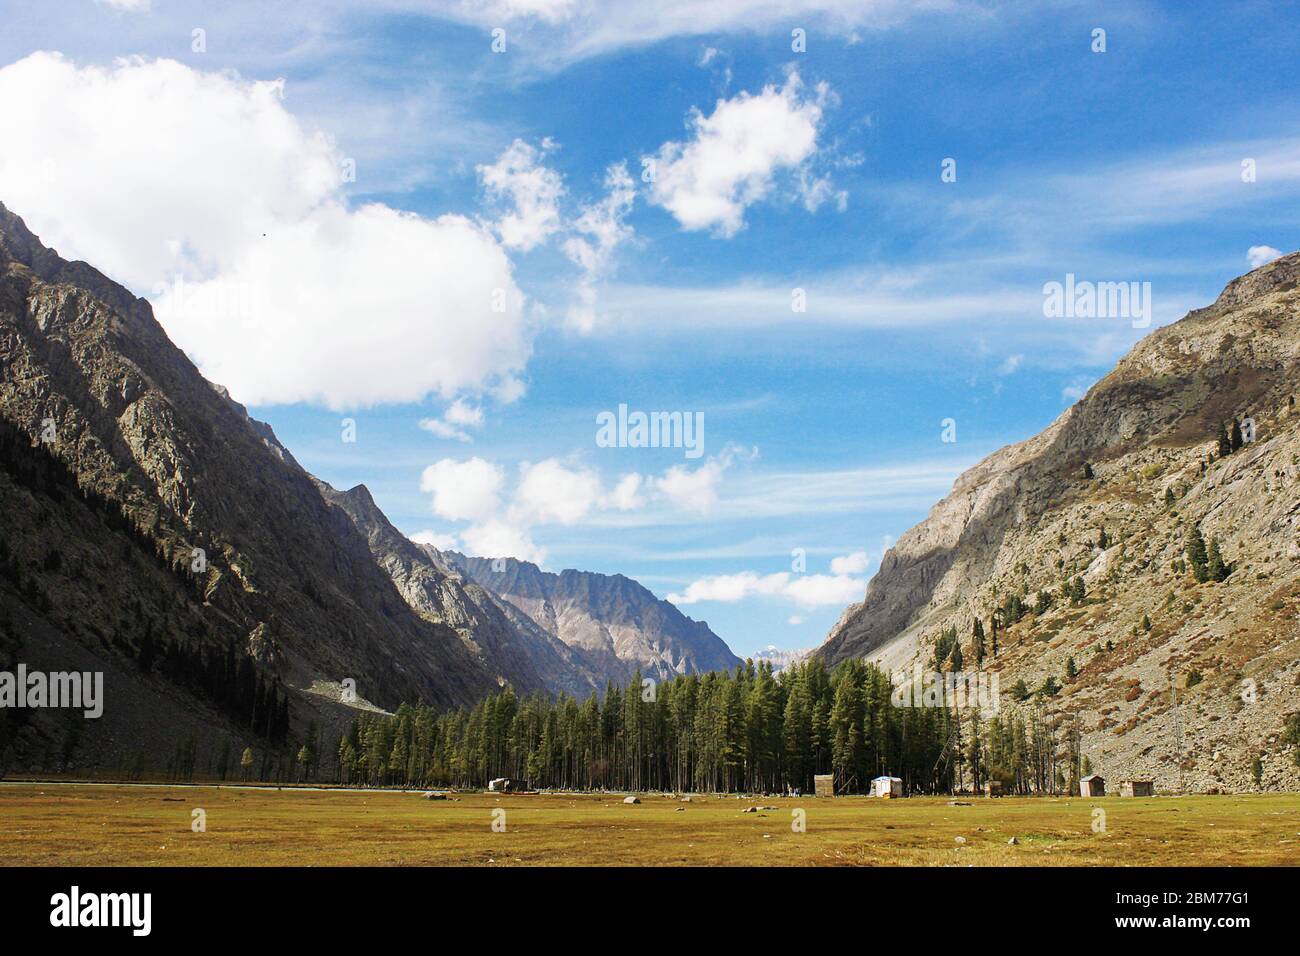 Beautiful Landscape in the mountains with blue skys and trees, swat valley, KPK Pakistan Stock Photo